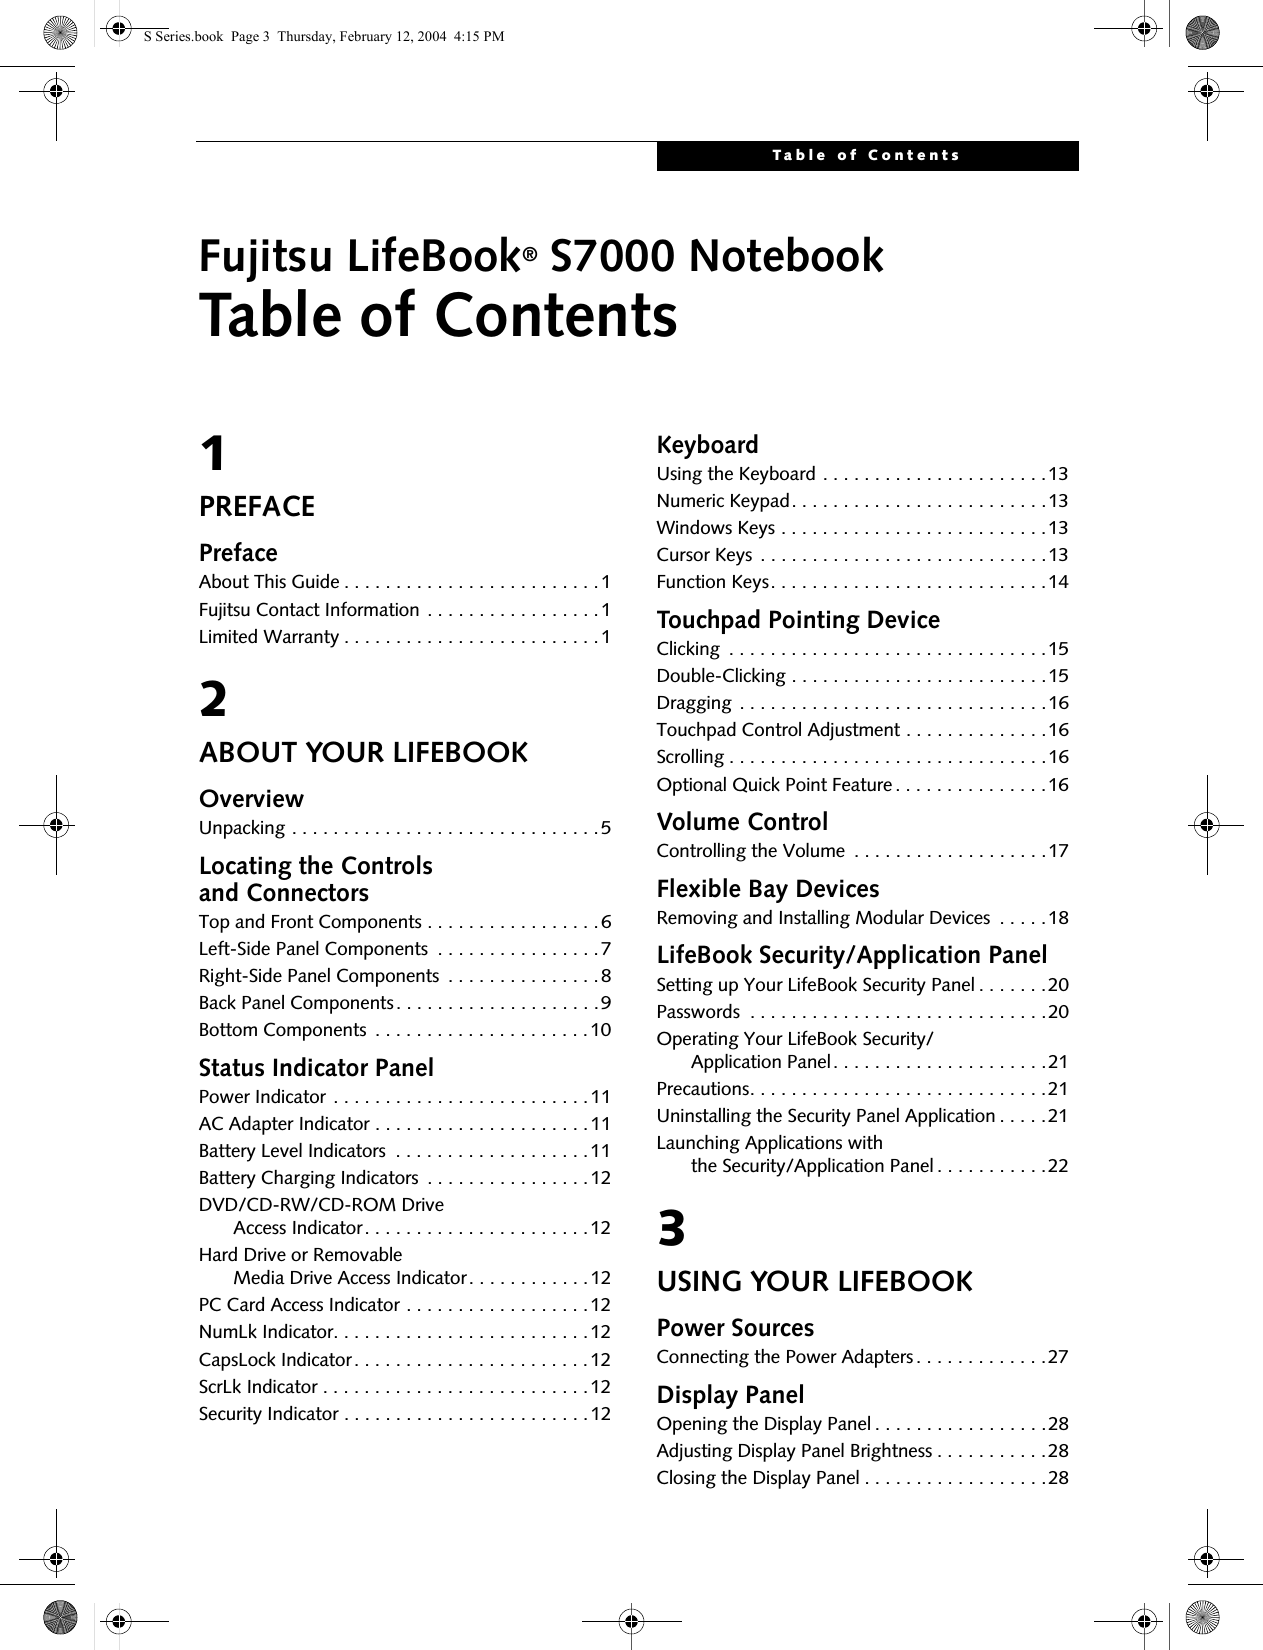 Table of ContentsFujitsu LifeBook® S7000 NotebookTable of Contents1PREFACEPrefaceAbout This Guide . . . . . . . . . . . . . . . . . . . . . . . . .1Fujitsu Contact Information . . . . . . . . . . . . . . . . .1Limited Warranty . . . . . . . . . . . . . . . . . . . . . . . . .12ABOUT YOUR LIFEBOOKOverviewUnpacking . . . . . . . . . . . . . . . . . . . . . . . . . . . . . .5Locating the Controlsand ConnectorsTop and Front Components . . . . . . . . . . . . . . . . .6Left-Side Panel Components  . . . . . . . . . . . . . . . .7Right-Side Panel Components  . . . . . . . . . . . . . . .8Back Panel Components. . . . . . . . . . . . . . . . . . . .9Bottom Components  . . . . . . . . . . . . . . . . . . . . .10Status Indicator PanelPower Indicator . . . . . . . . . . . . . . . . . . . . . . . . .11AC Adapter Indicator . . . . . . . . . . . . . . . . . . . . .11Battery Level Indicators  . . . . . . . . . . . . . . . . . . .11Battery Charging Indicators  . . . . . . . . . . . . . . . .12DVD/CD-RW/CD-ROM Drive     Access Indicator. . . . . . . . . . . . . . . . . . . . . .12Hard Drive or Removable     Media Drive Access Indicator. . . . . . . . . . . .12PC Card Access Indicator . . . . . . . . . . . . . . . . . .12NumLk Indicator. . . . . . . . . . . . . . . . . . . . . . . . .12CapsLock Indicator. . . . . . . . . . . . . . . . . . . . . . .12ScrLk Indicator . . . . . . . . . . . . . . . . . . . . . . . . . .12Security Indicator . . . . . . . . . . . . . . . . . . . . . . . .12KeyboardUsing the Keyboard . . . . . . . . . . . . . . . . . . . . . .13Numeric Keypad. . . . . . . . . . . . . . . . . . . . . . . . .13Windows Keys . . . . . . . . . . . . . . . . . . . . . . . . . .13Cursor Keys . . . . . . . . . . . . . . . . . . . . . . . . . . . .13Function Keys. . . . . . . . . . . . . . . . . . . . . . . . . . .14Touchpad Pointing DeviceClicking  . . . . . . . . . . . . . . . . . . . . . . . . . . . . . . .15Double-Clicking . . . . . . . . . . . . . . . . . . . . . . . . .15Dragging . . . . . . . . . . . . . . . . . . . . . . . . . . . . . .16Touchpad Control Adjustment . . . . . . . . . . . . . .16Scrolling . . . . . . . . . . . . . . . . . . . . . . . . . . . . . . .16Optional Quick Point Feature. . . . . . . . . . . . . . .16Volume ControlControlling the Volume  . . . . . . . . . . . . . . . . . . .17Flexible Bay DevicesRemoving and Installing Modular Devices  . . . . .18LifeBook Security/Application PanelSetting up Your LifeBook Security Panel . . . . . . .20Passwords  . . . . . . . . . . . . . . . . . . . . . . . . . . . . .20Operating Your LifeBook Security/     Application Panel. . . . . . . . . . . . . . . . . . . . .21Precautions. . . . . . . . . . . . . . . . . . . . . . . . . . . . .21Uninstalling the Security Panel Application . . . . .21Launching Applications with     the Security/Application Panel . . . . . . . . . . .223USING YOUR LIFEBOOKPower SourcesConnecting the Power Adapters . . . . . . . . . . . . .27Display PanelOpening the Display Panel . . . . . . . . . . . . . . . . .28Adjusting Display Panel Brightness . . . . . . . . . . .28Closing the Display Panel . . . . . . . . . . . . . . . . . .28S Series.book  Page 3  Thursday, February 12, 2004  4:15 PM